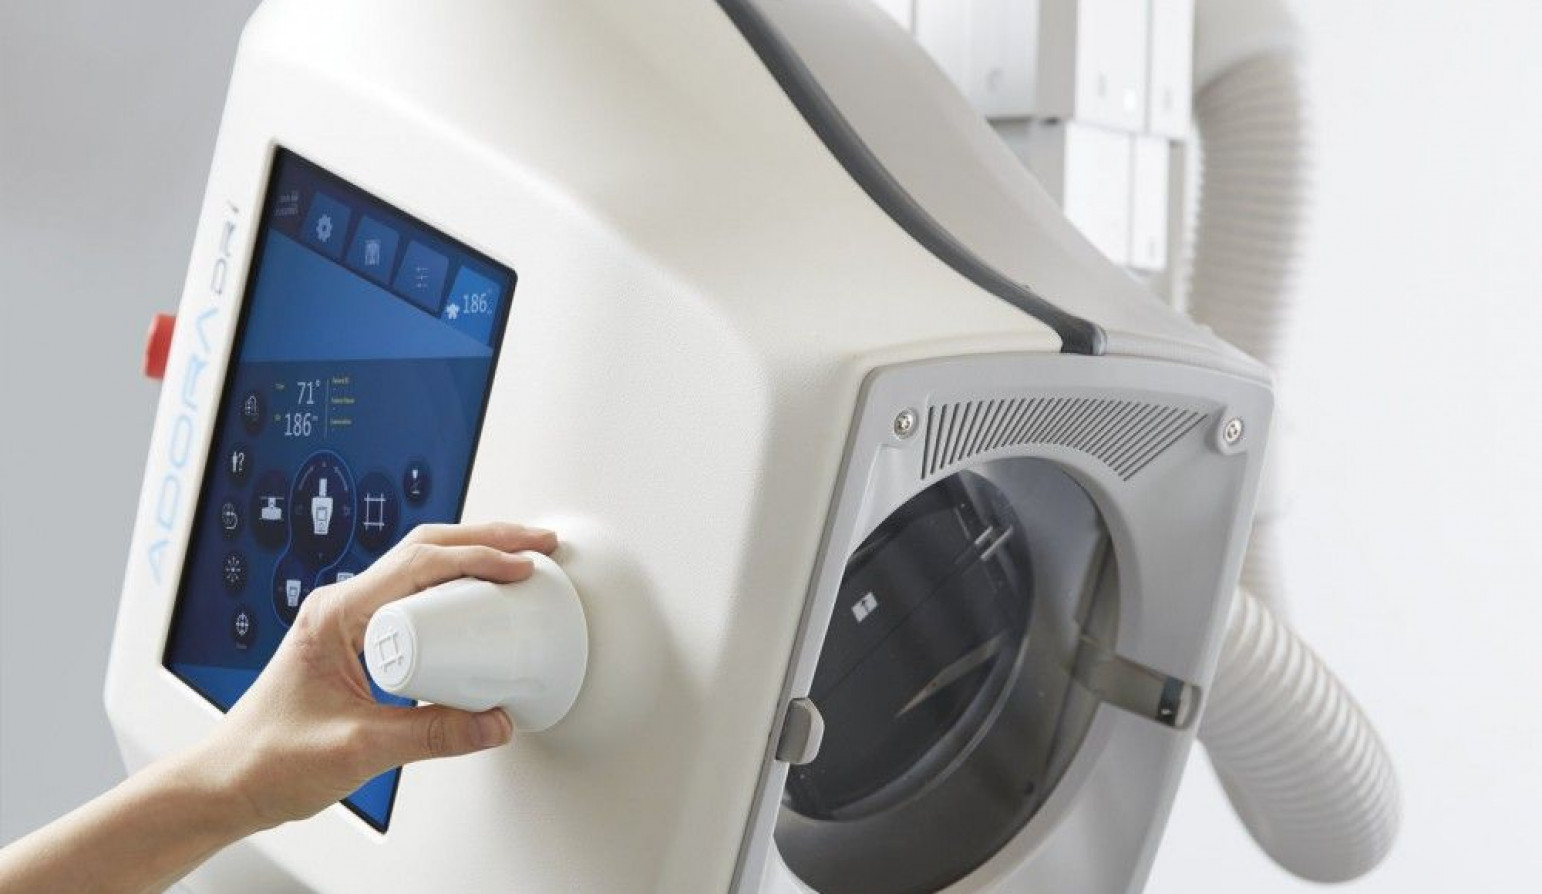 Iceland’s University hospital selects Adora DRi x-ray system in frame agreement